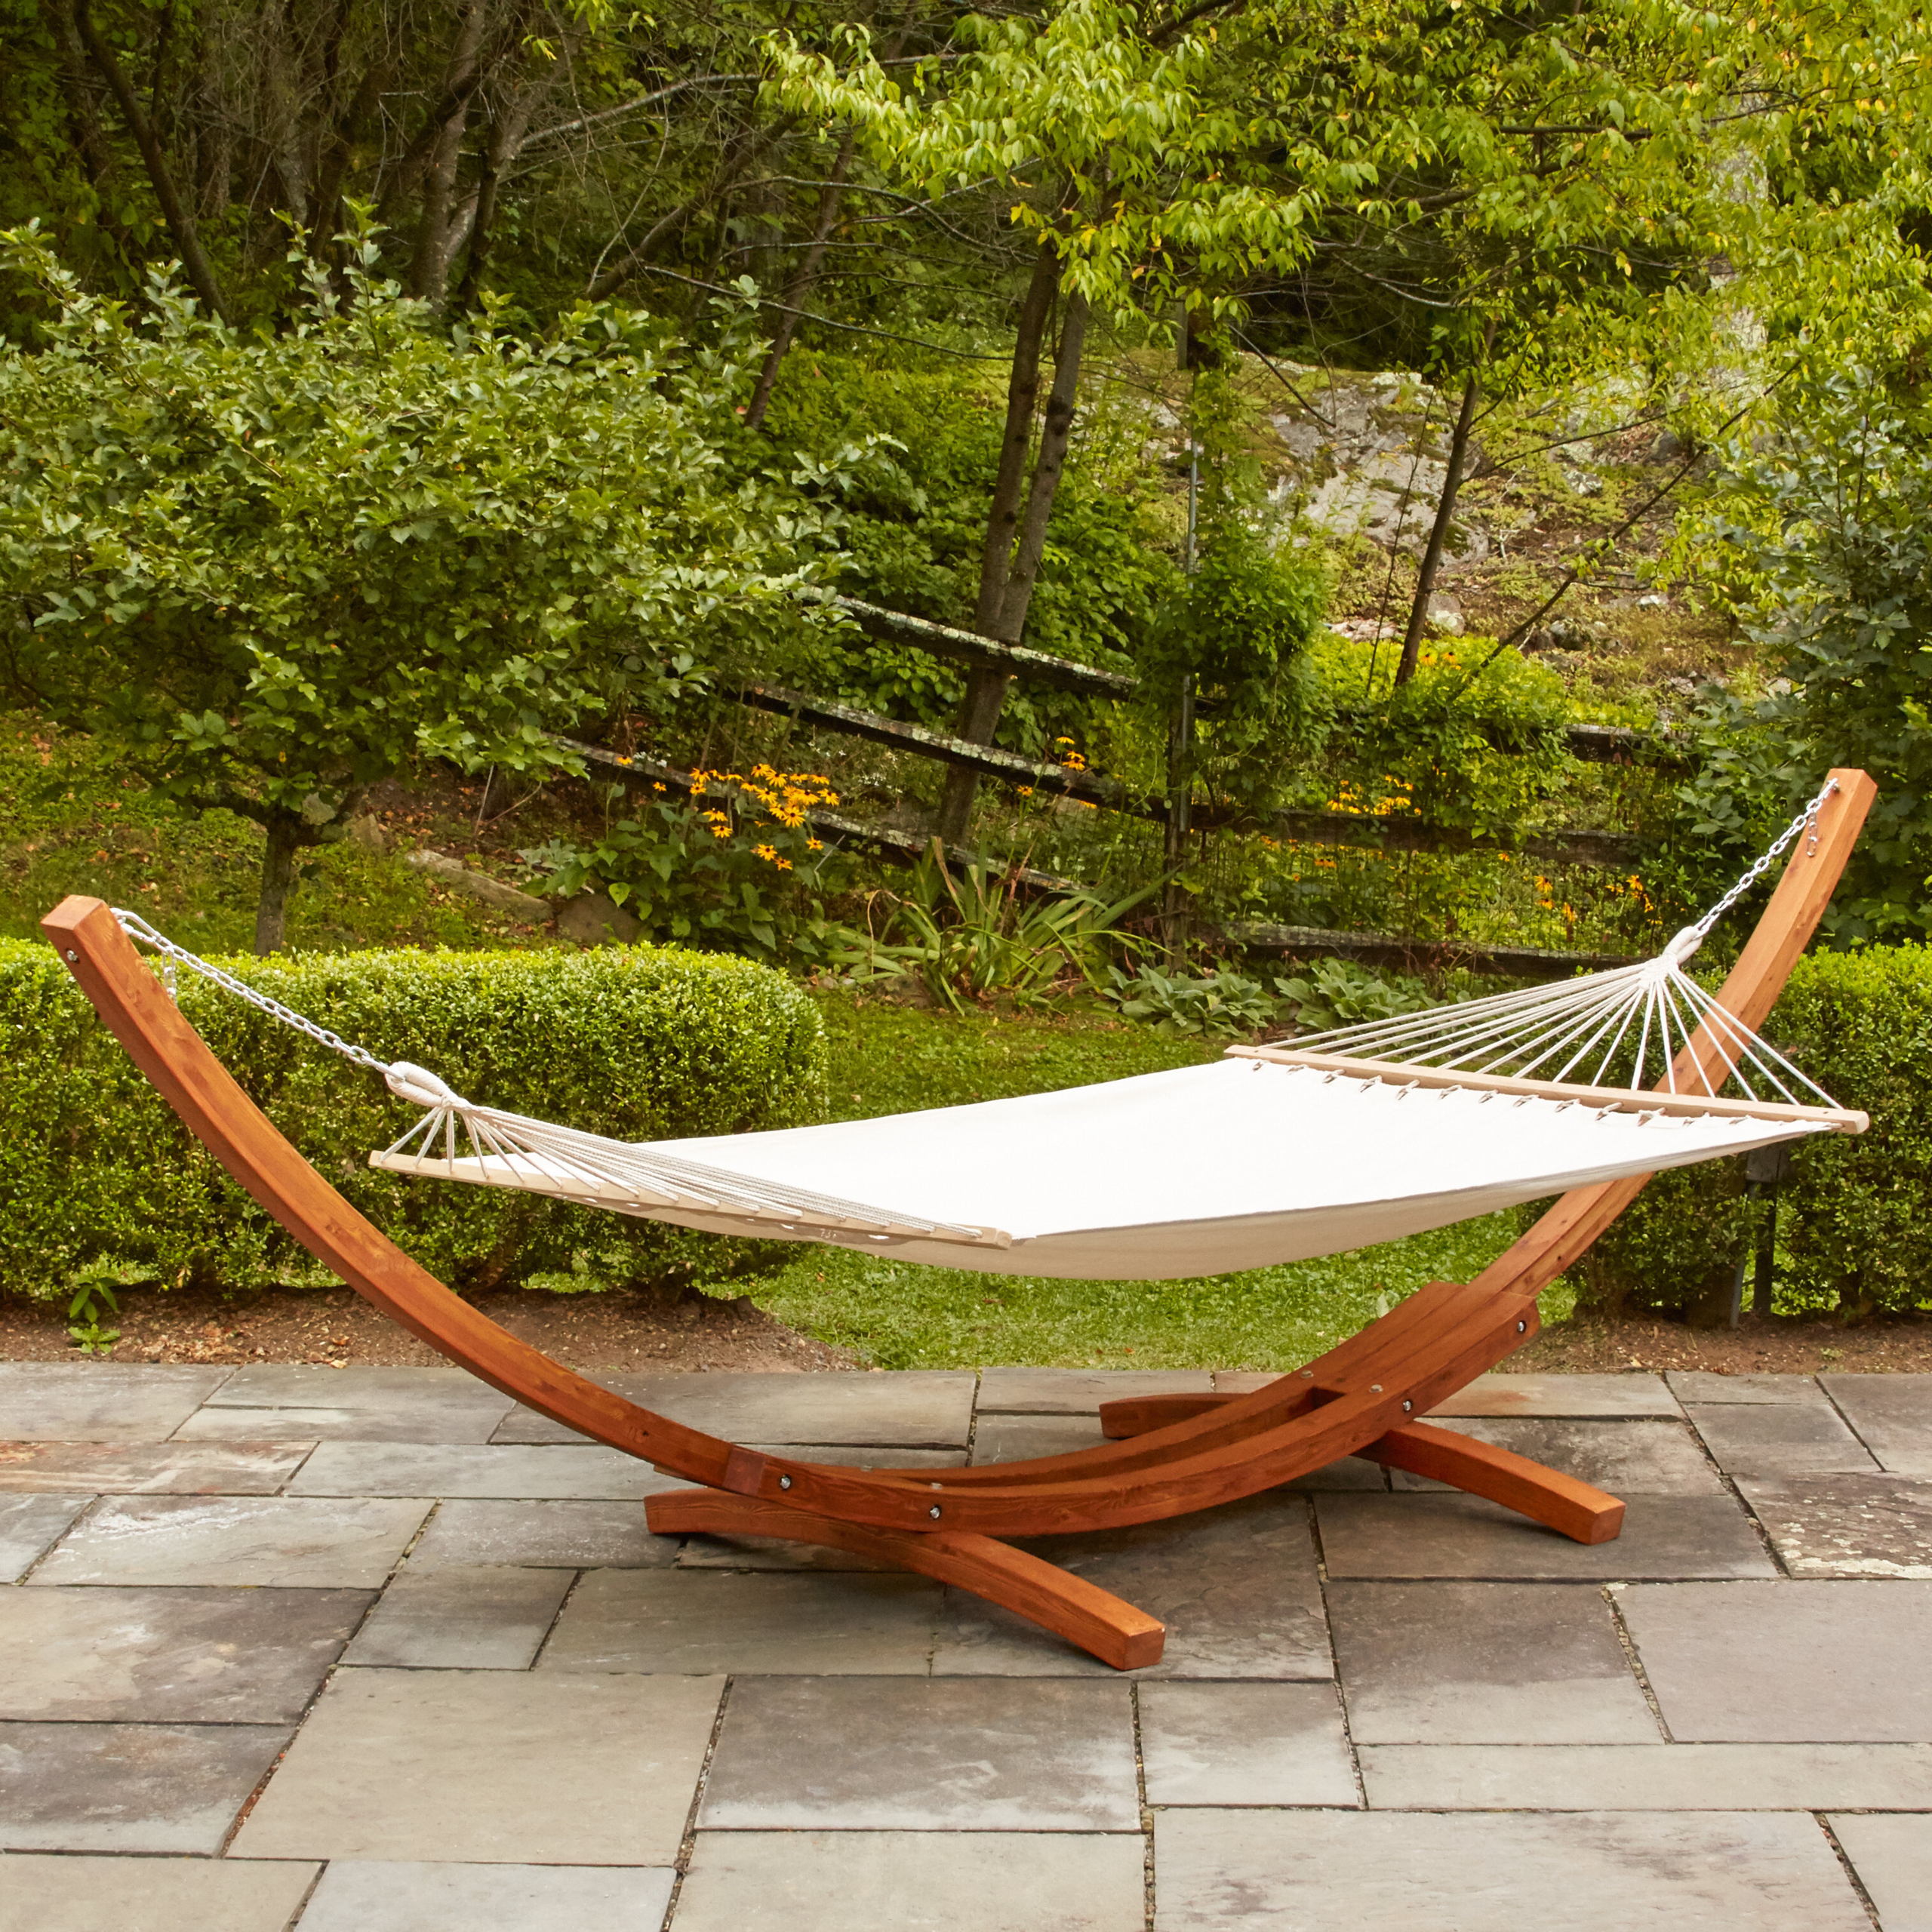 10 Best Hammock On Stand for Sale - VisualHunt